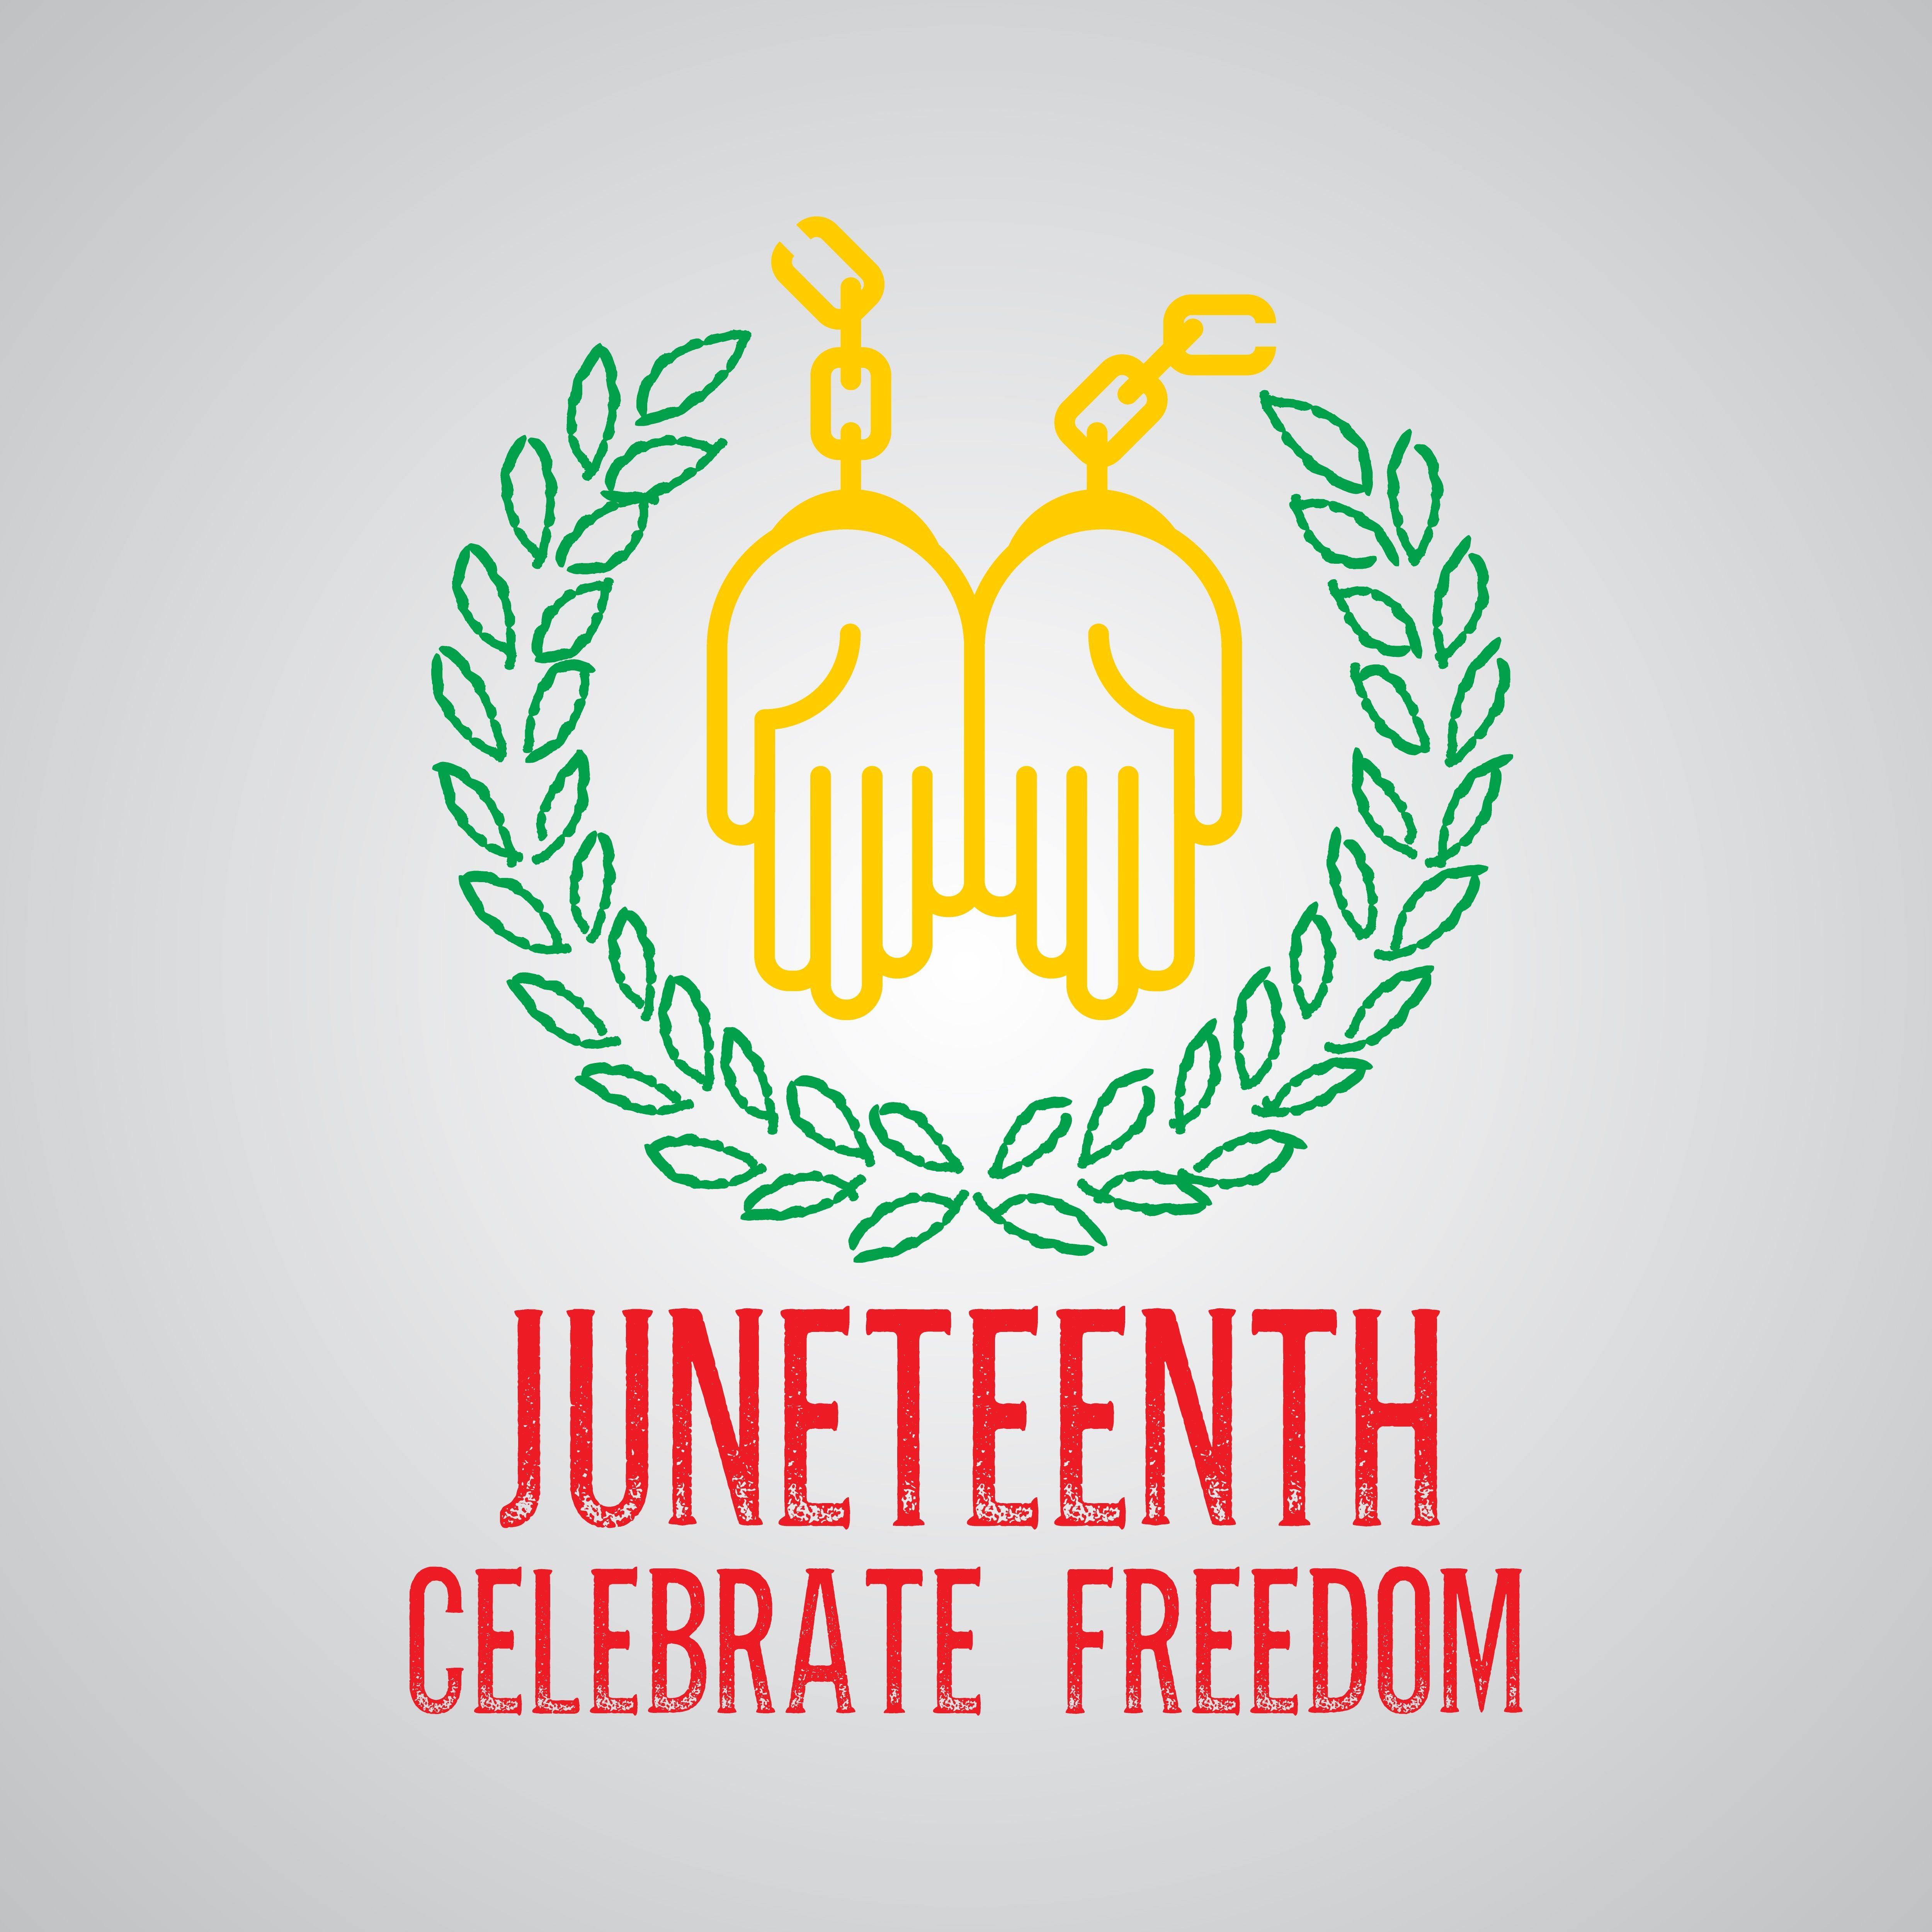 Juneteenth Logo - Happy Juneteenth! Eat Soul Food, Dance Your Heart Out, & Step Back